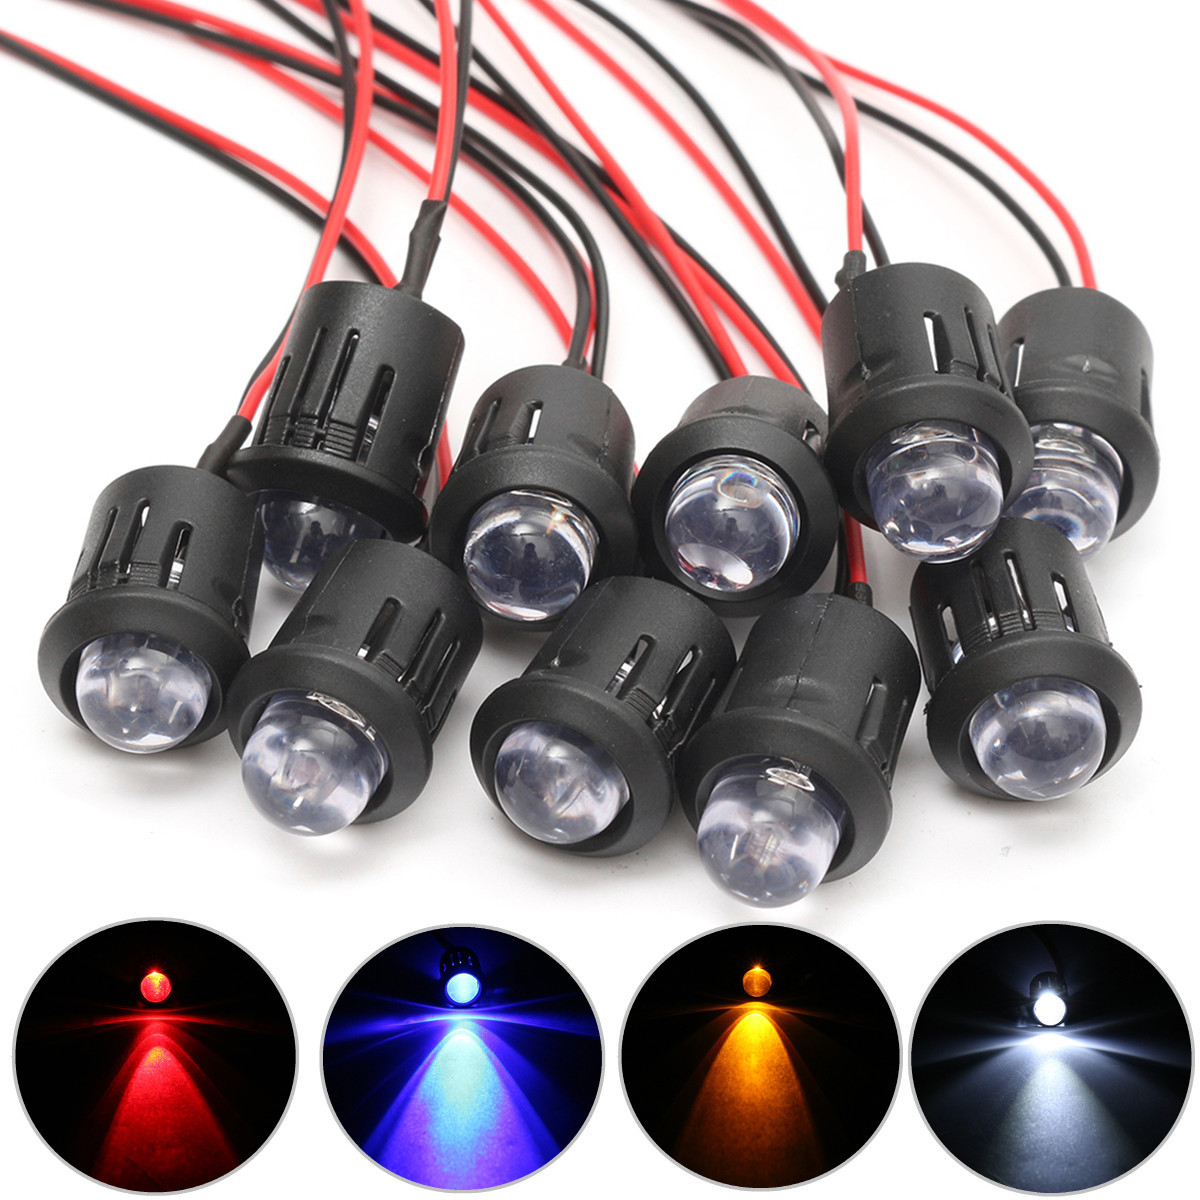 10Pcs 12V 10mm Ultra Bright Pre-wired Constant LEDs Water Clear LED 13